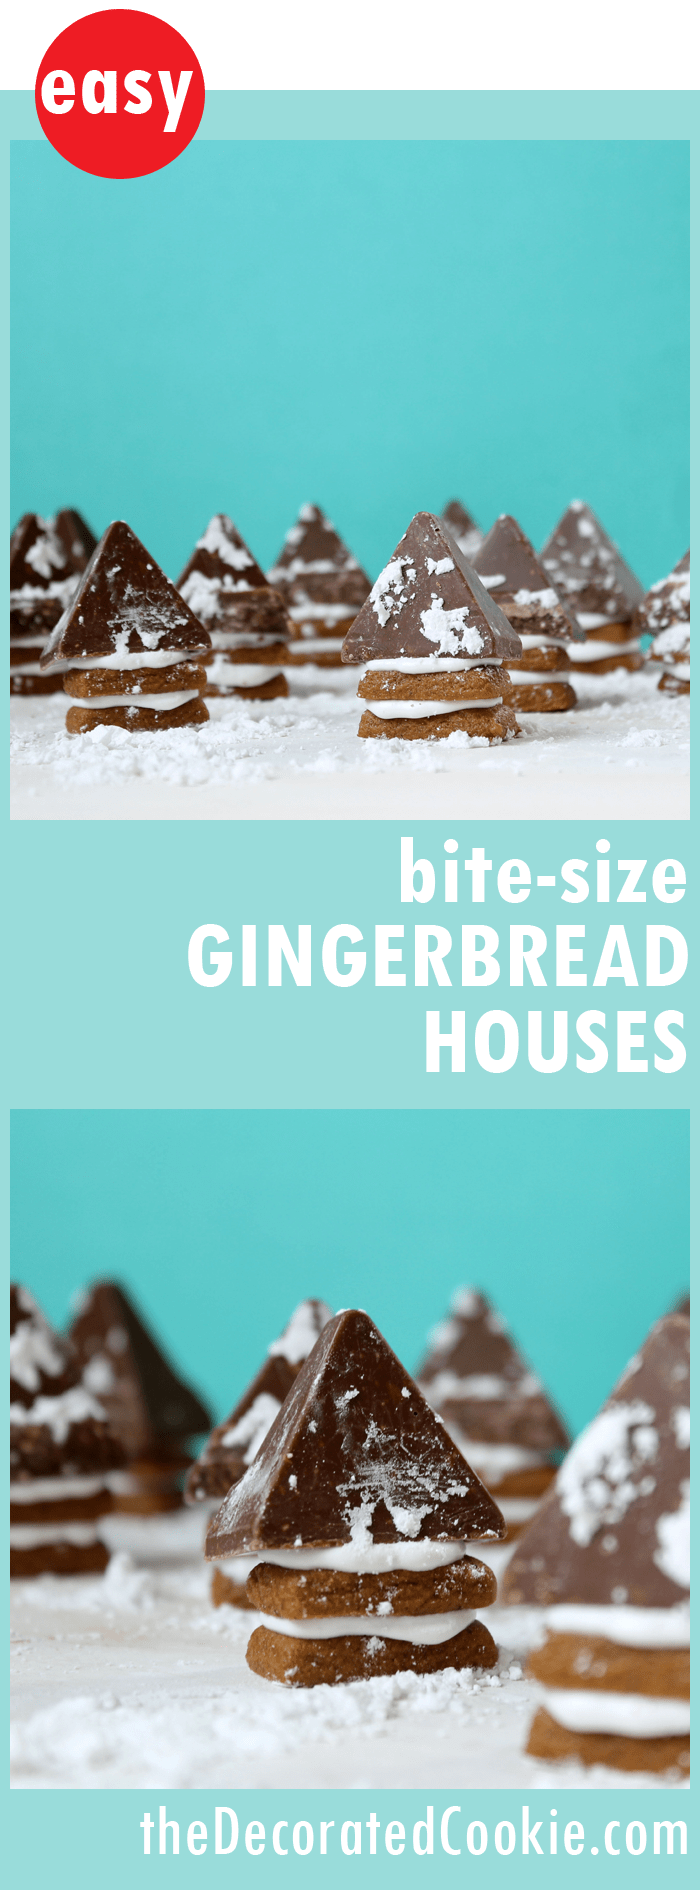 bite-size gingerbread houses -- easy, mini gingerbread houses for a fun Christmas treat